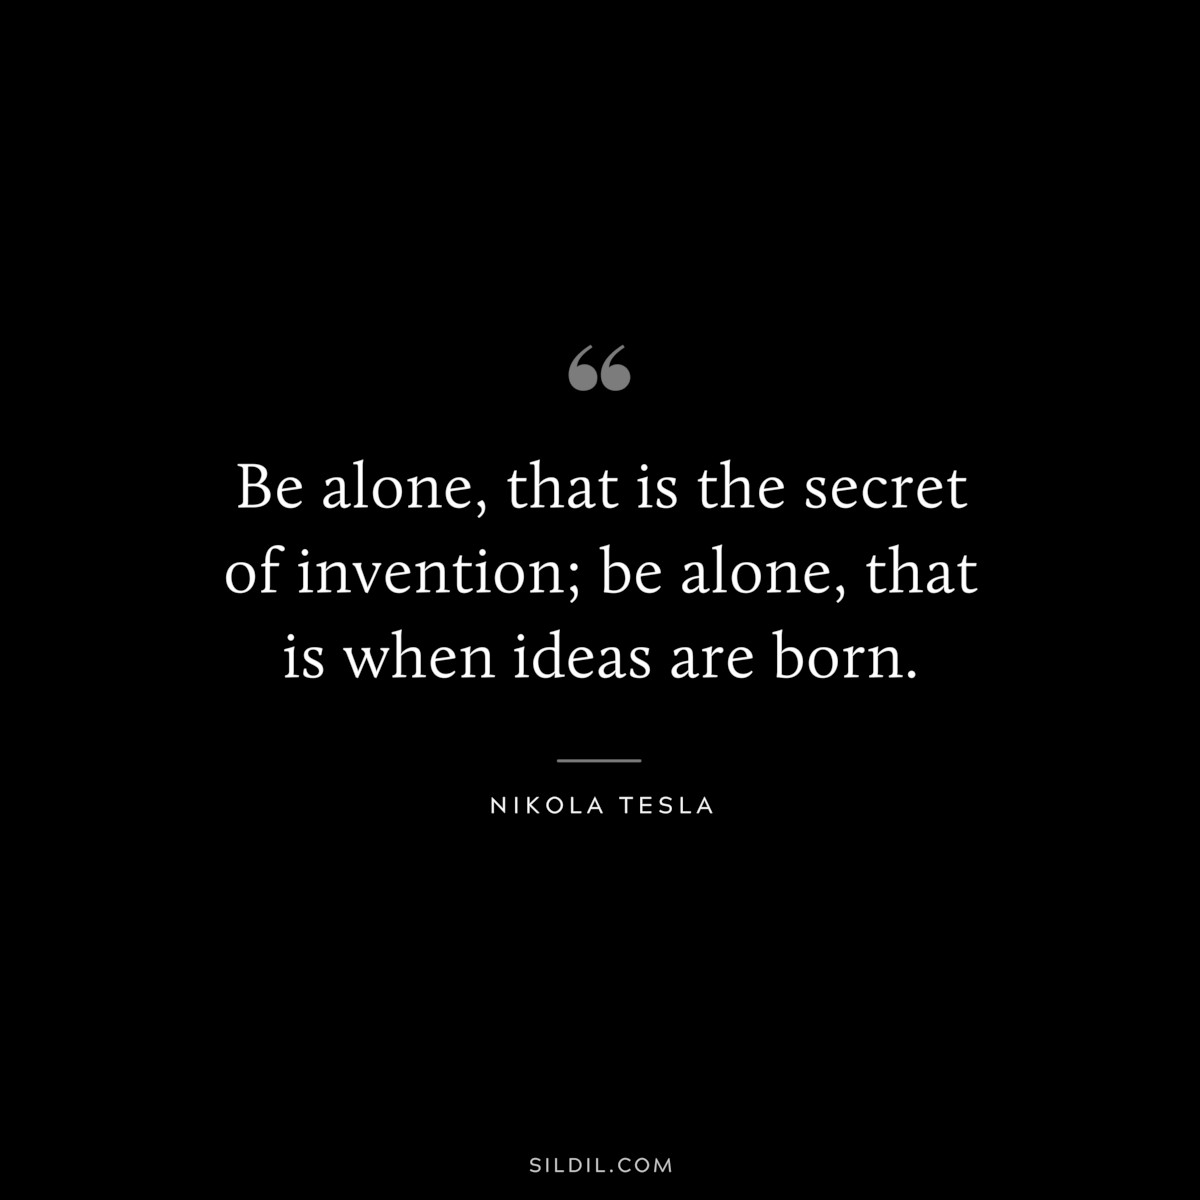 Be alone, that is the secret of invention; be alone, that is when ideas are born. ― Nikola Tesla